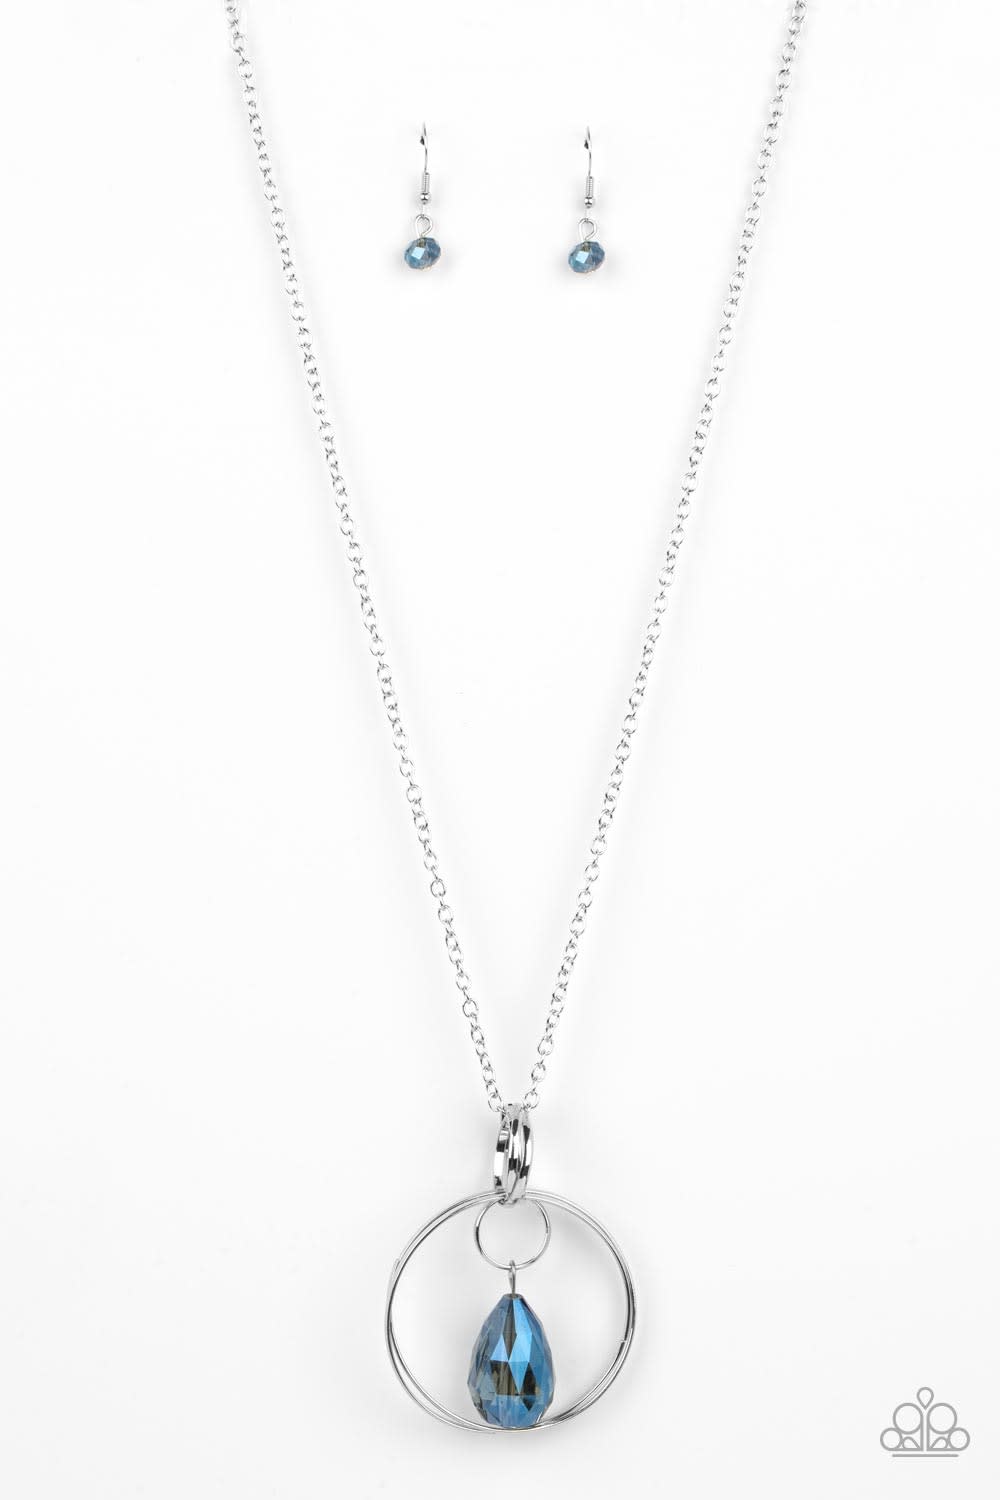 Swinging Shimmer - Blue Necklace - Paparazzi Accessories